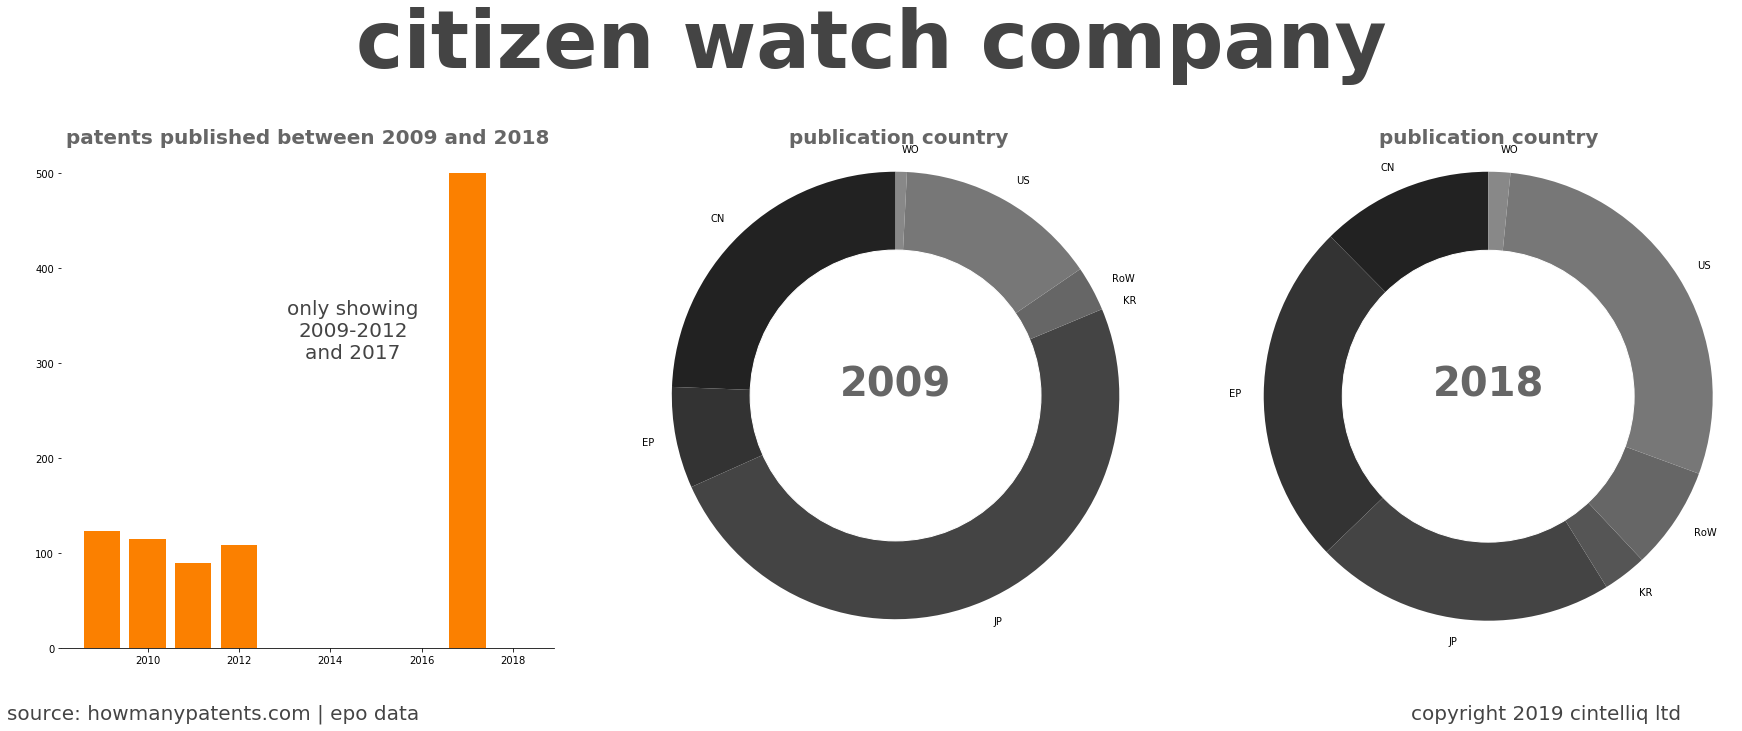 summary of patents for Citizen Watch Company